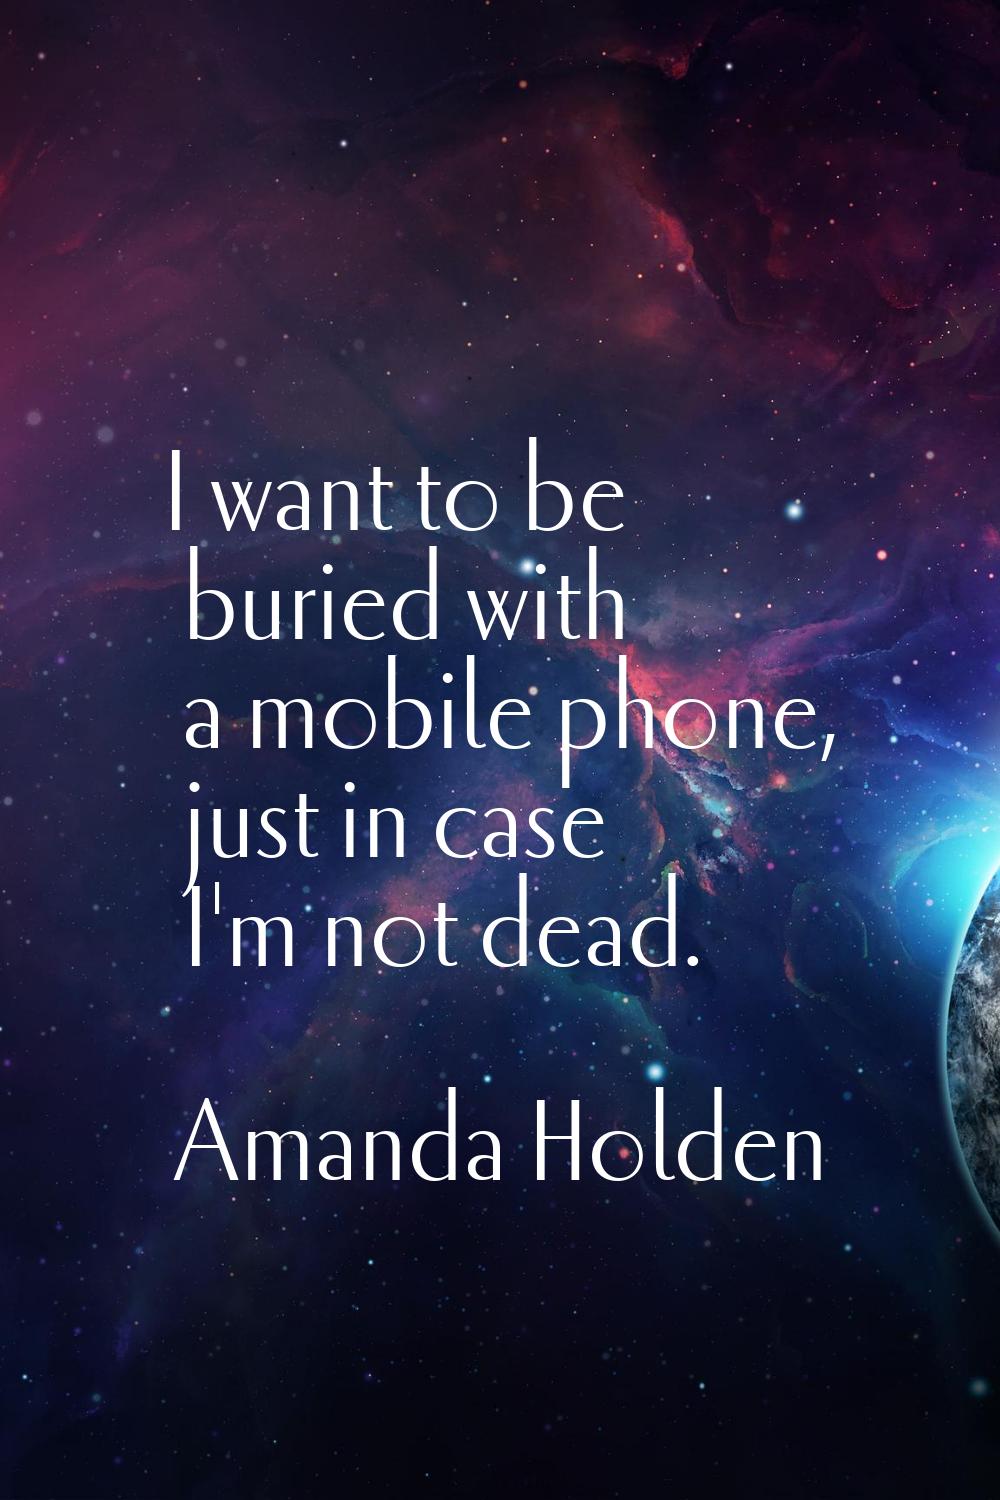 I want to be buried with a mobile phone, just in case I'm not dead.